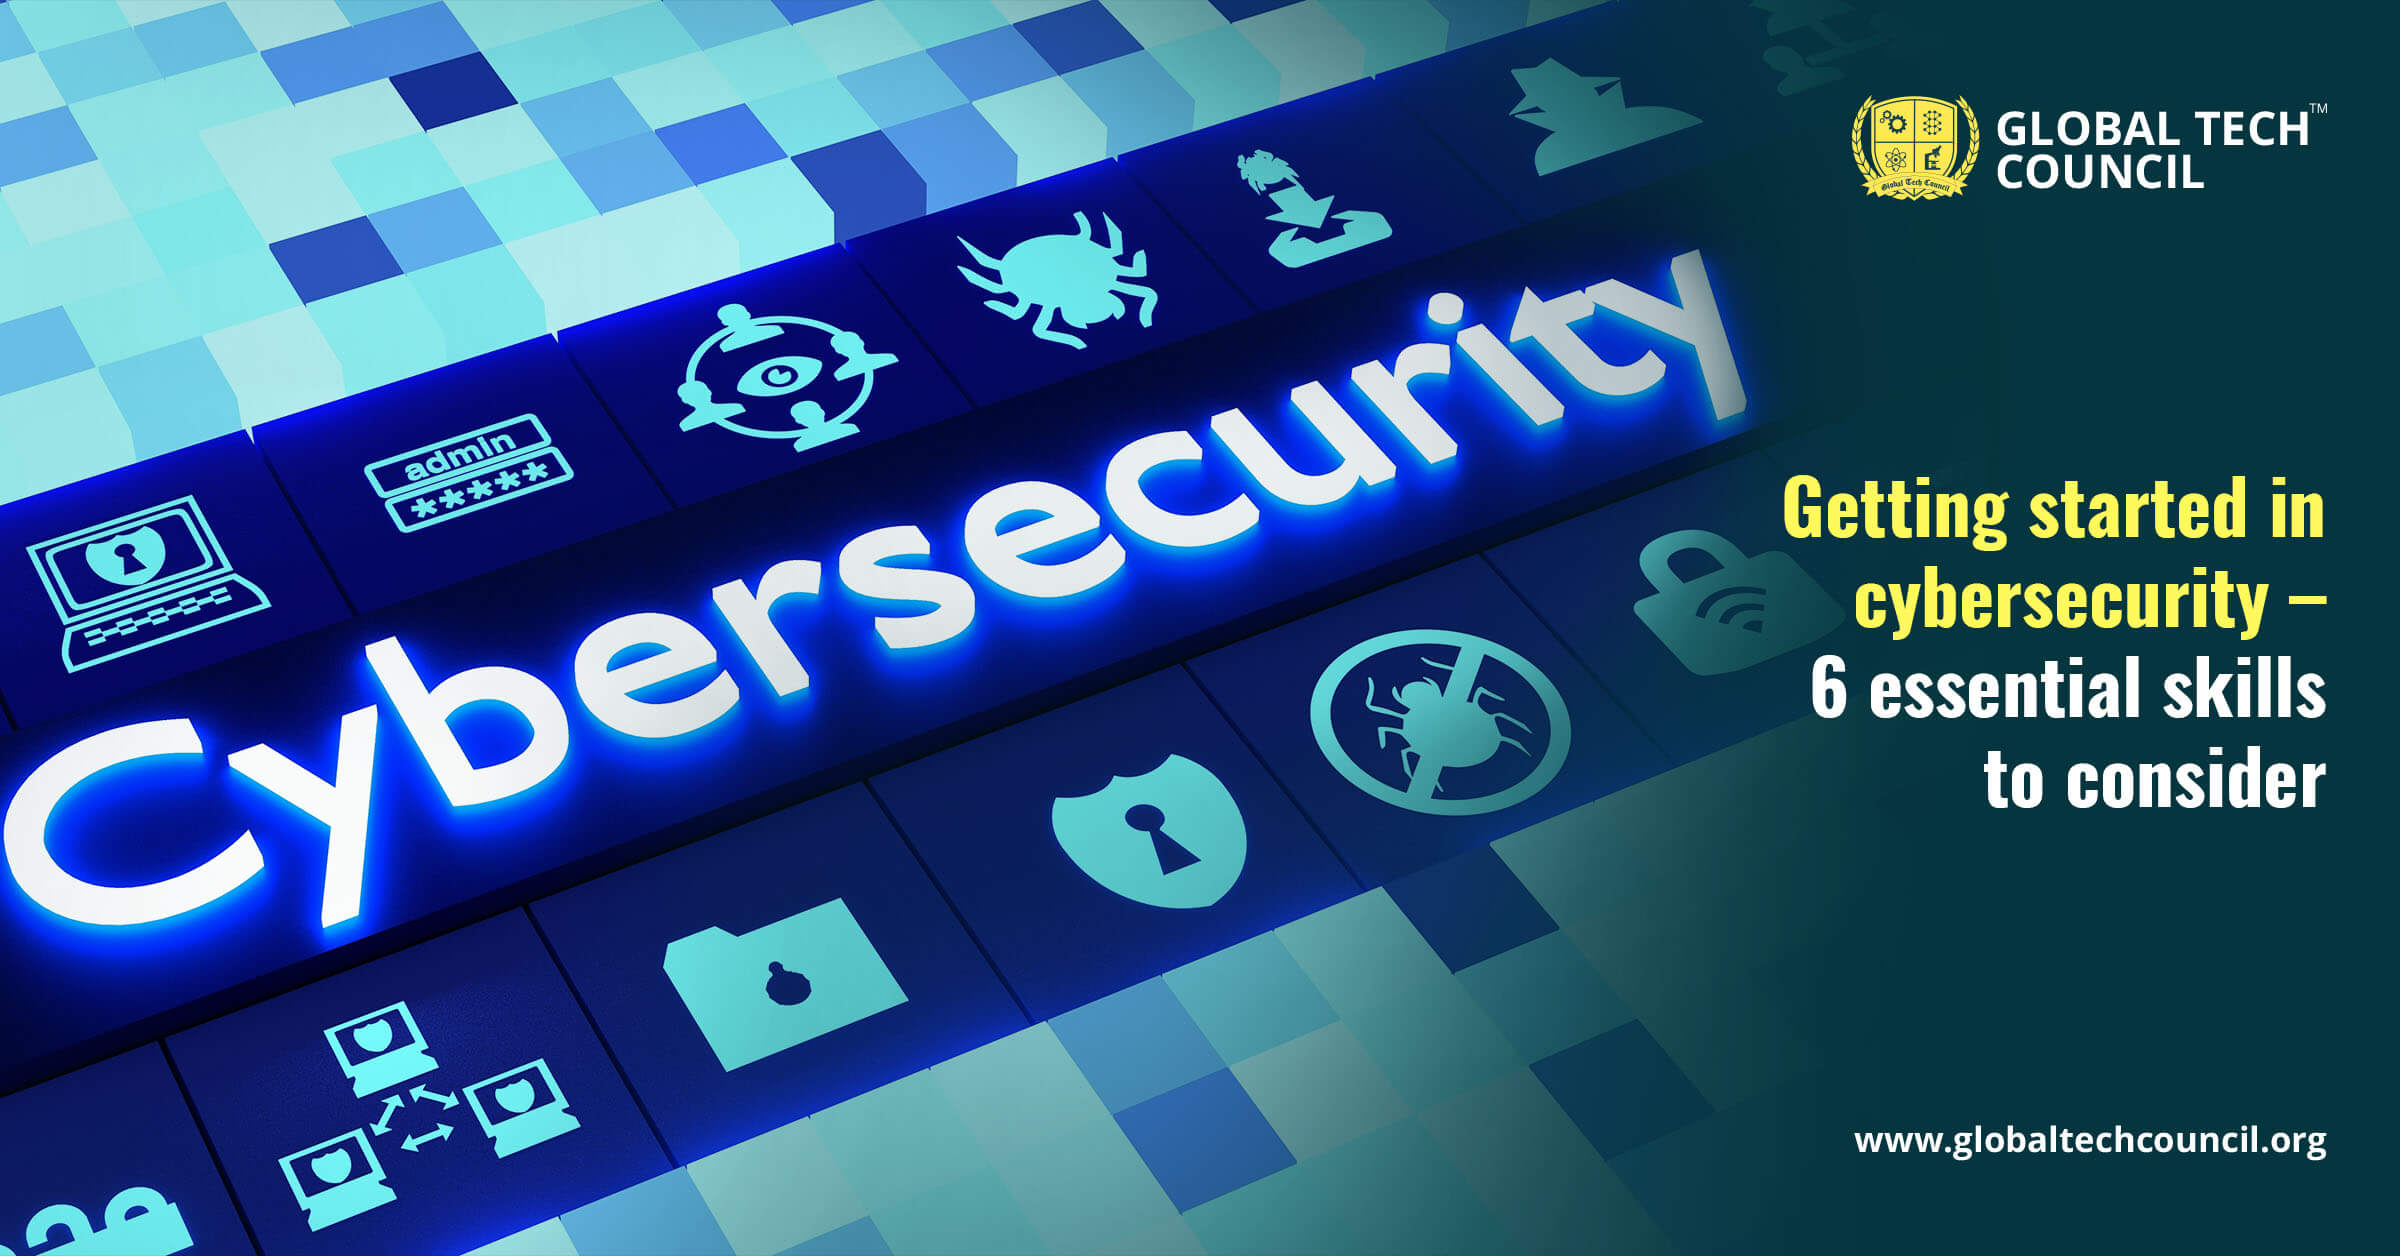 Getting started in cybersecurity – 6 essential skills to consider